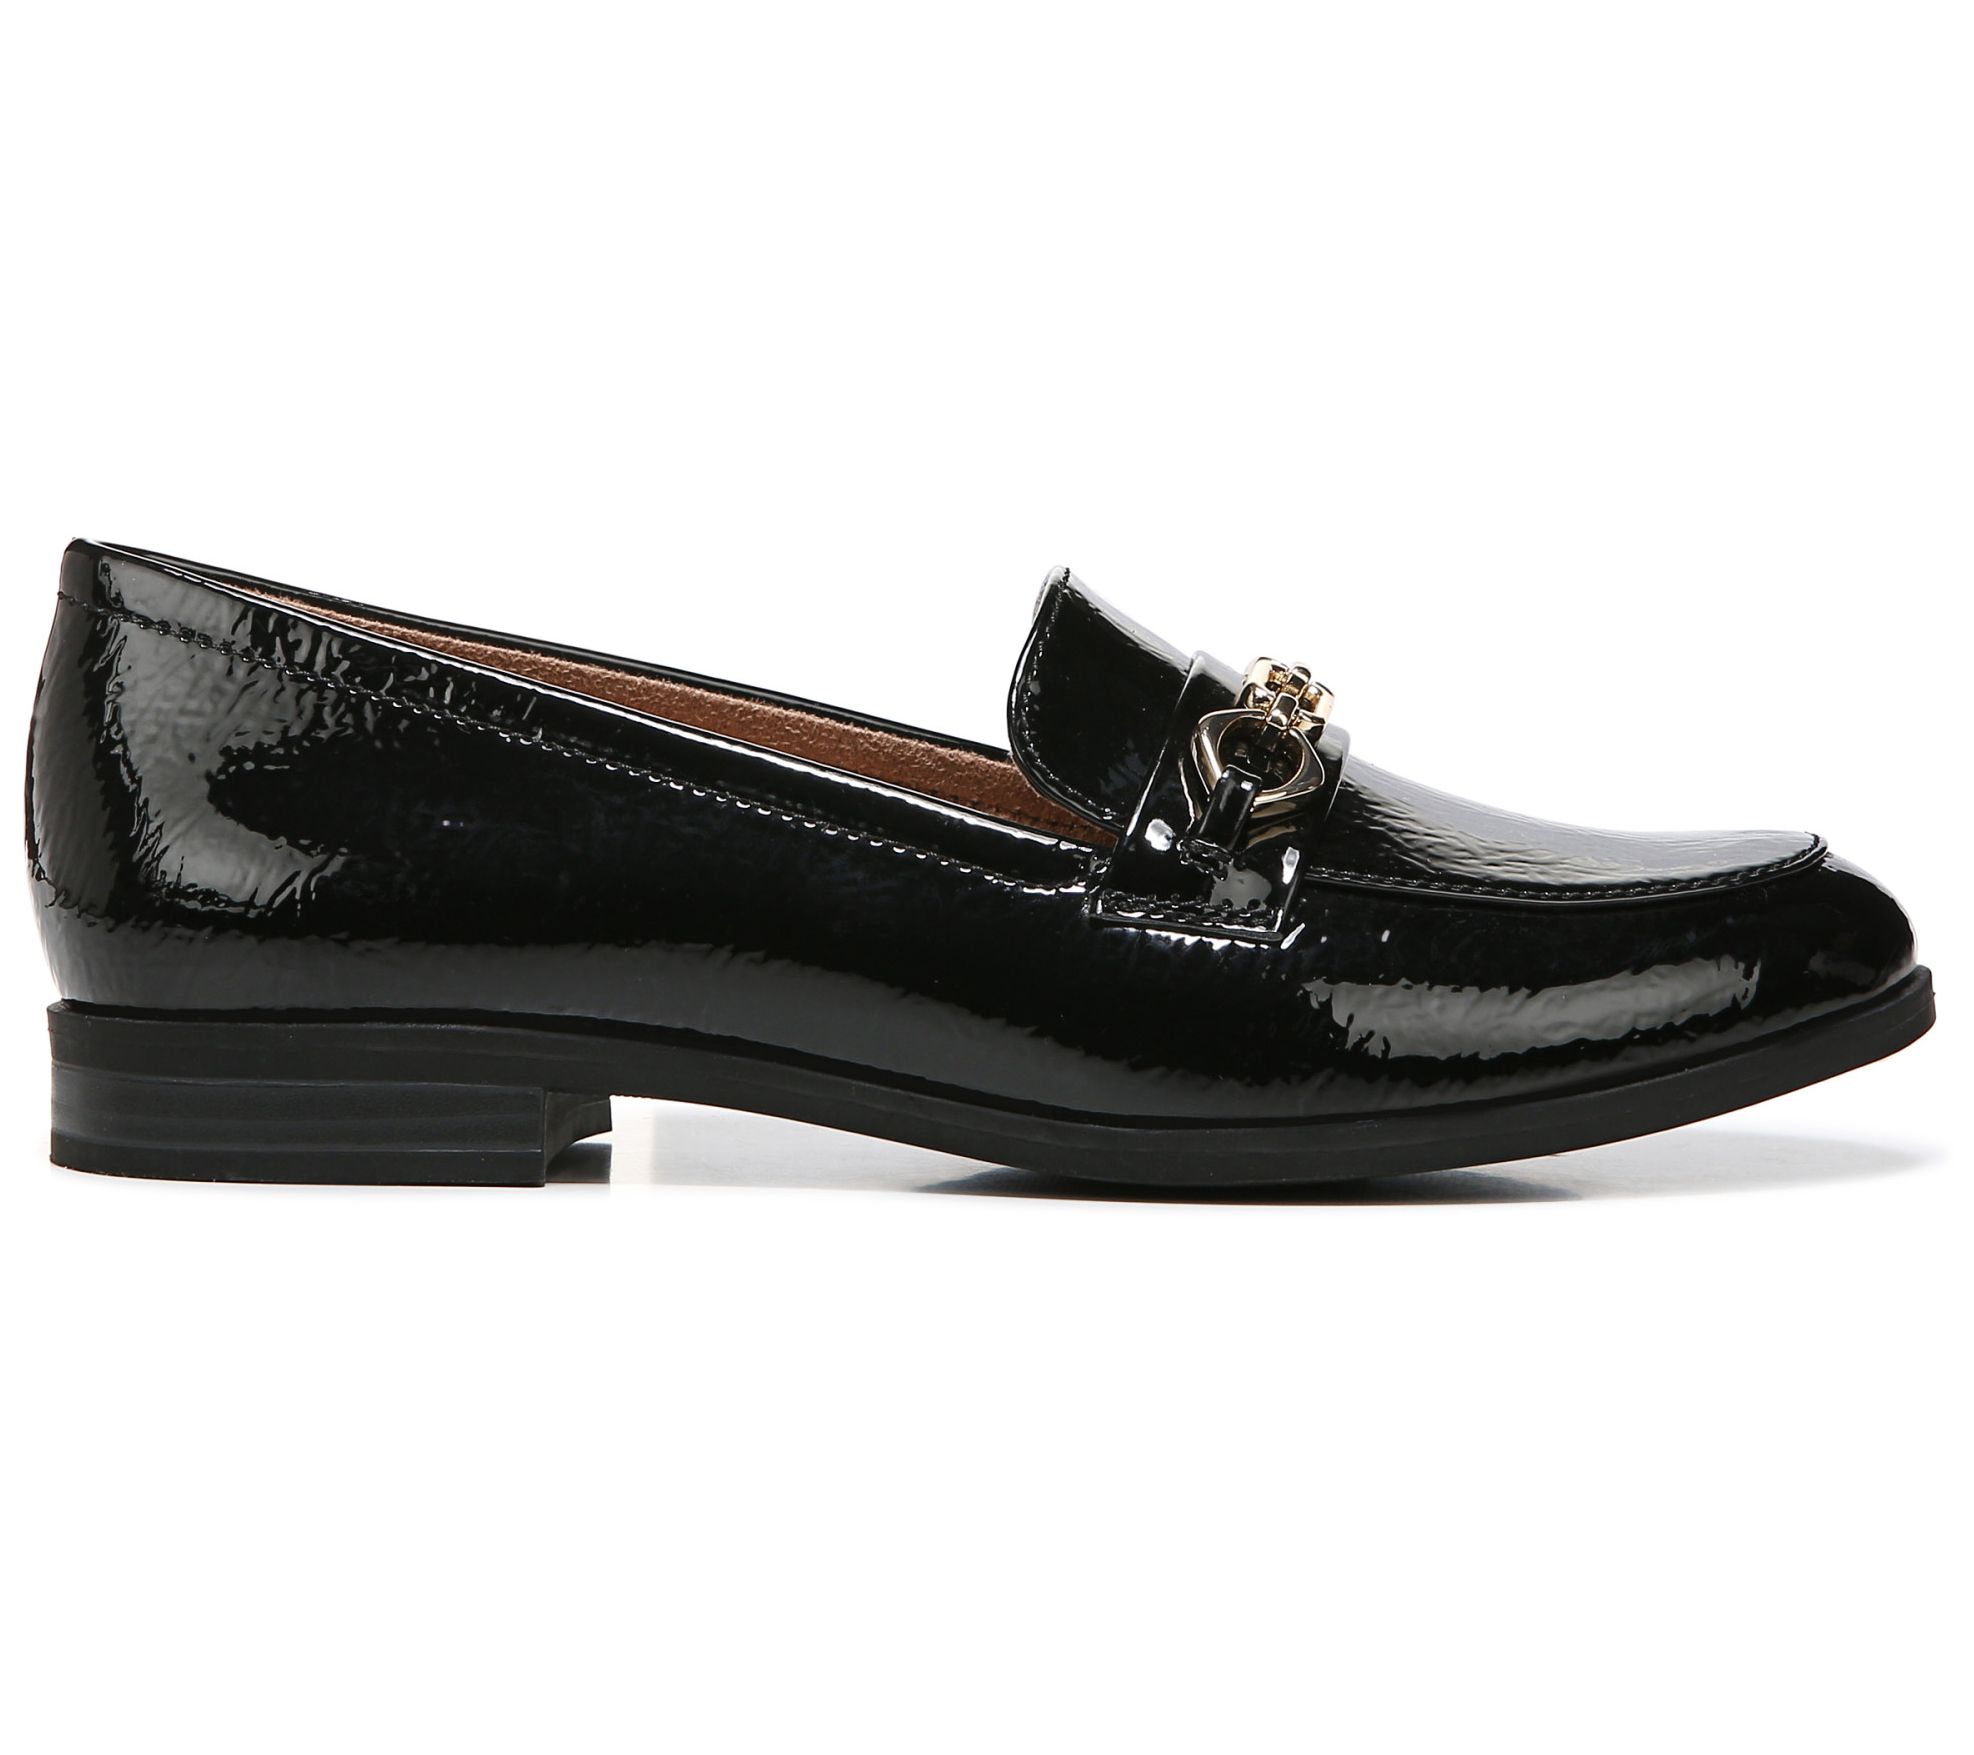 Naturalizer Slip-On Loafer - Mariana - QVC.com